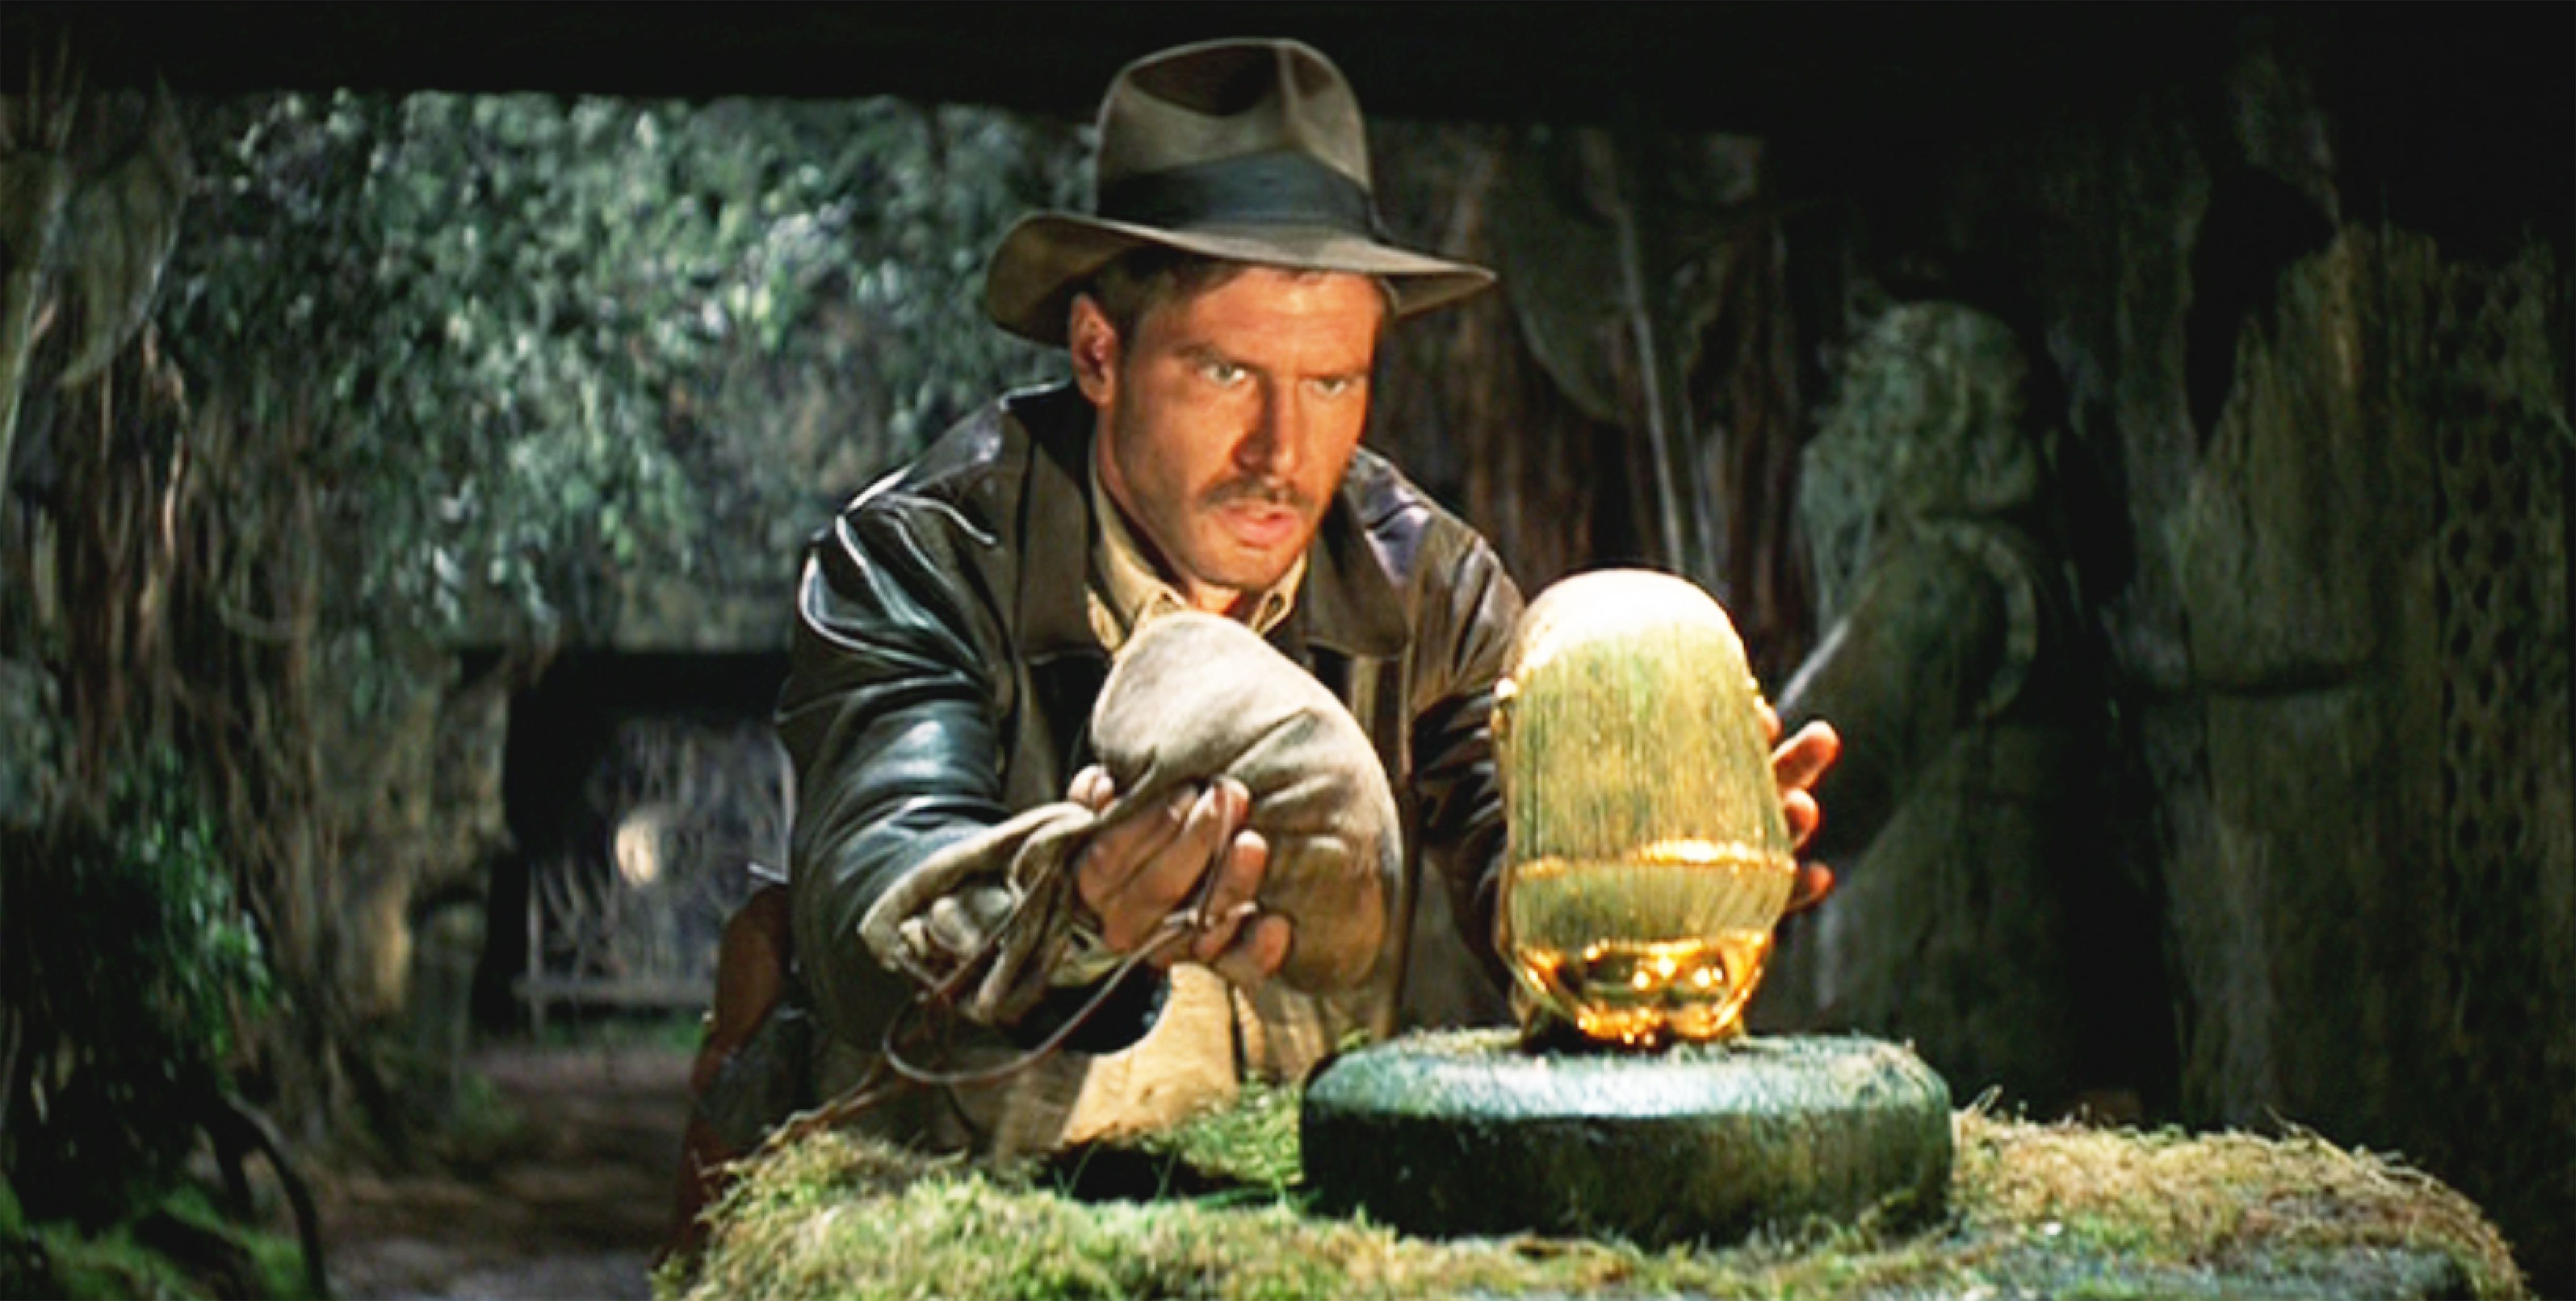 Original Film Title: INDIANA JONES AND THE KINGDOM OF THE CRYSTAL SKULL.  English Title: INDIANA JONES AND THE KINGDOM OF THE CRYSTAL SKULL. Film  Director: STEVEN SPIELBERG. Year: 2008. Stars: HARRISON FORD;